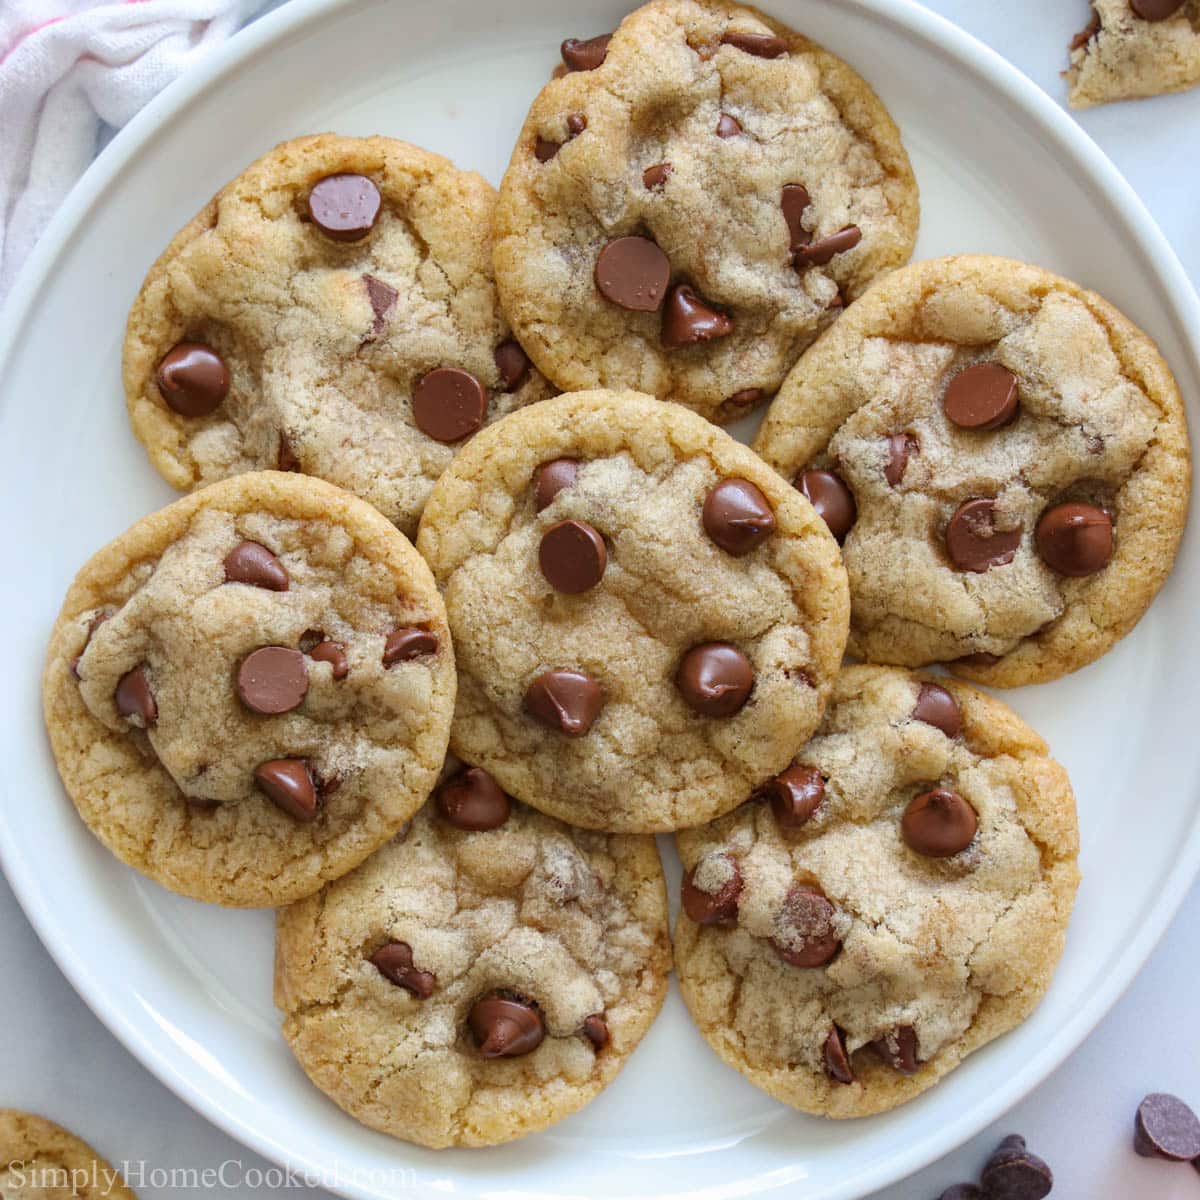 https://simplyhomecooked.com/wp-content/uploads/2021/09/chewy-chocolate-chip-cookies-6.jpg